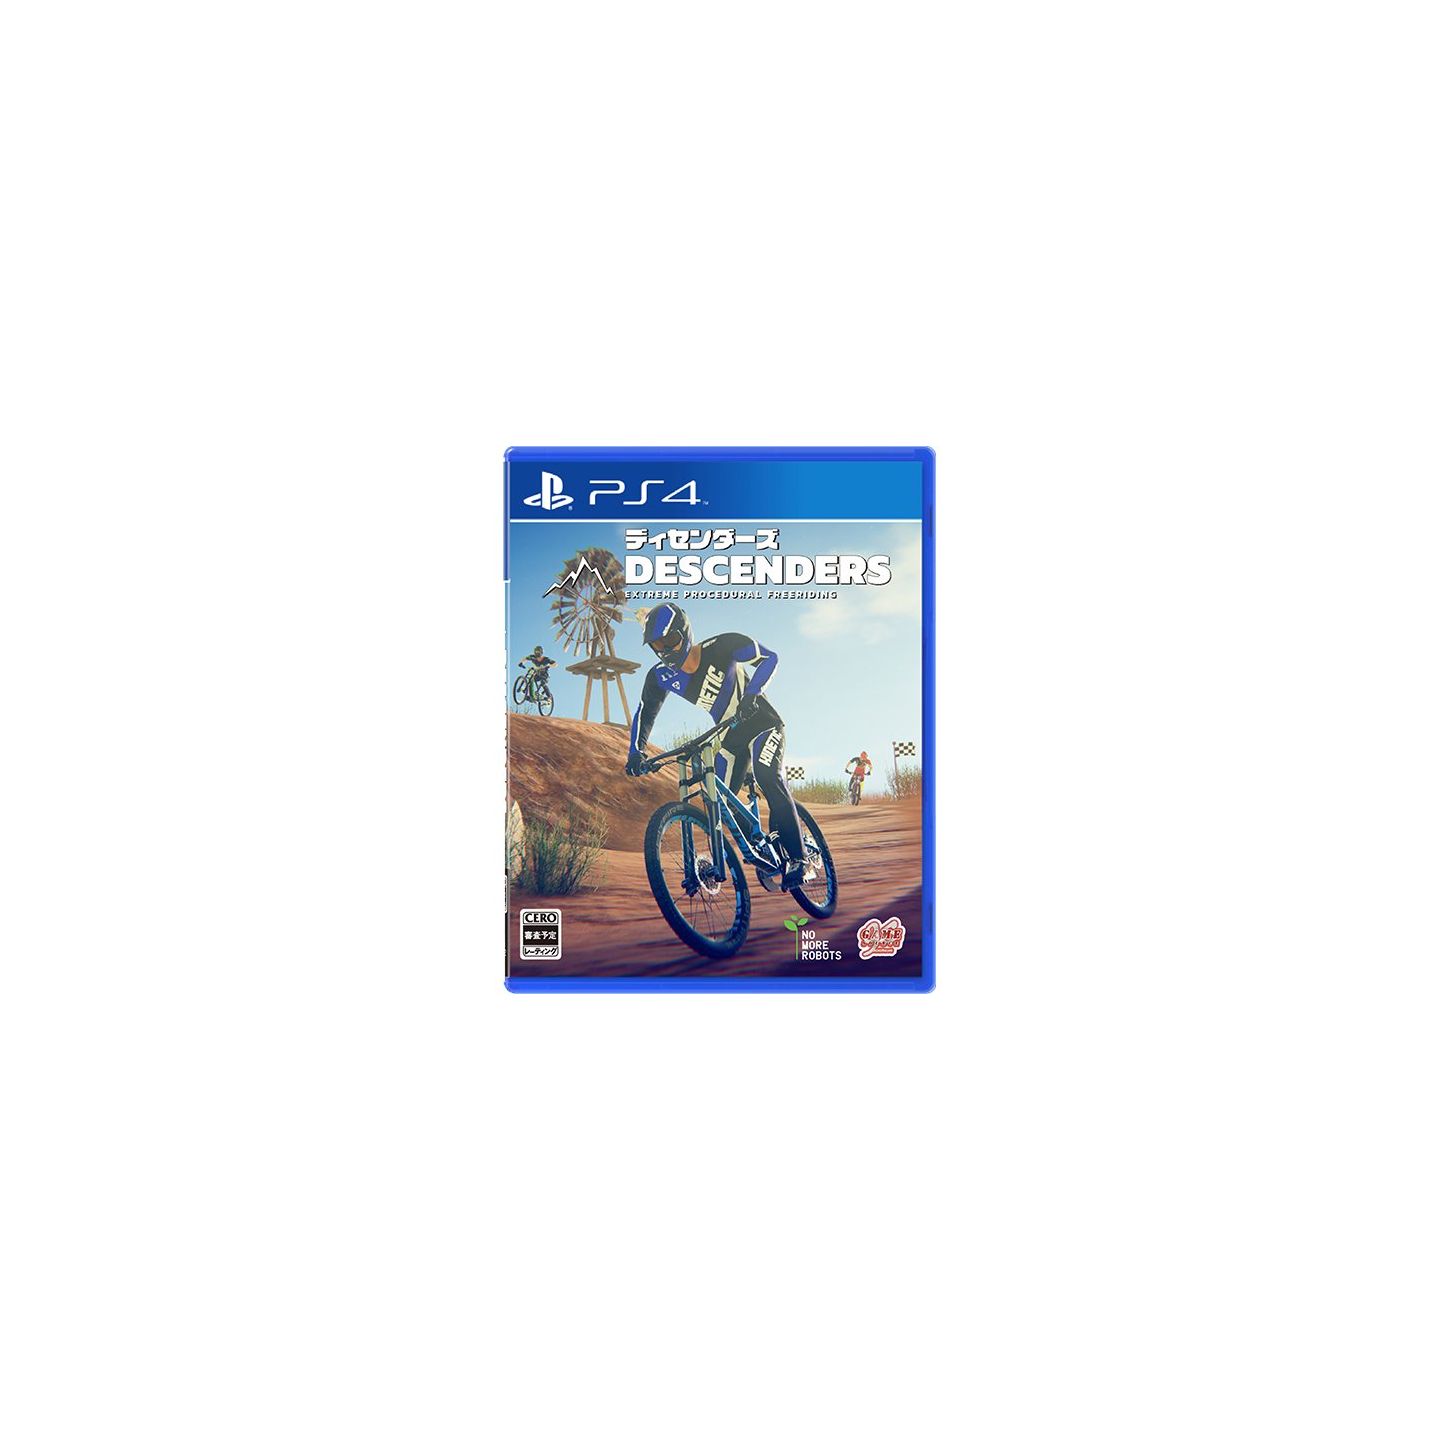 Entertainment Source Game PS4 Descenders Playstation 4